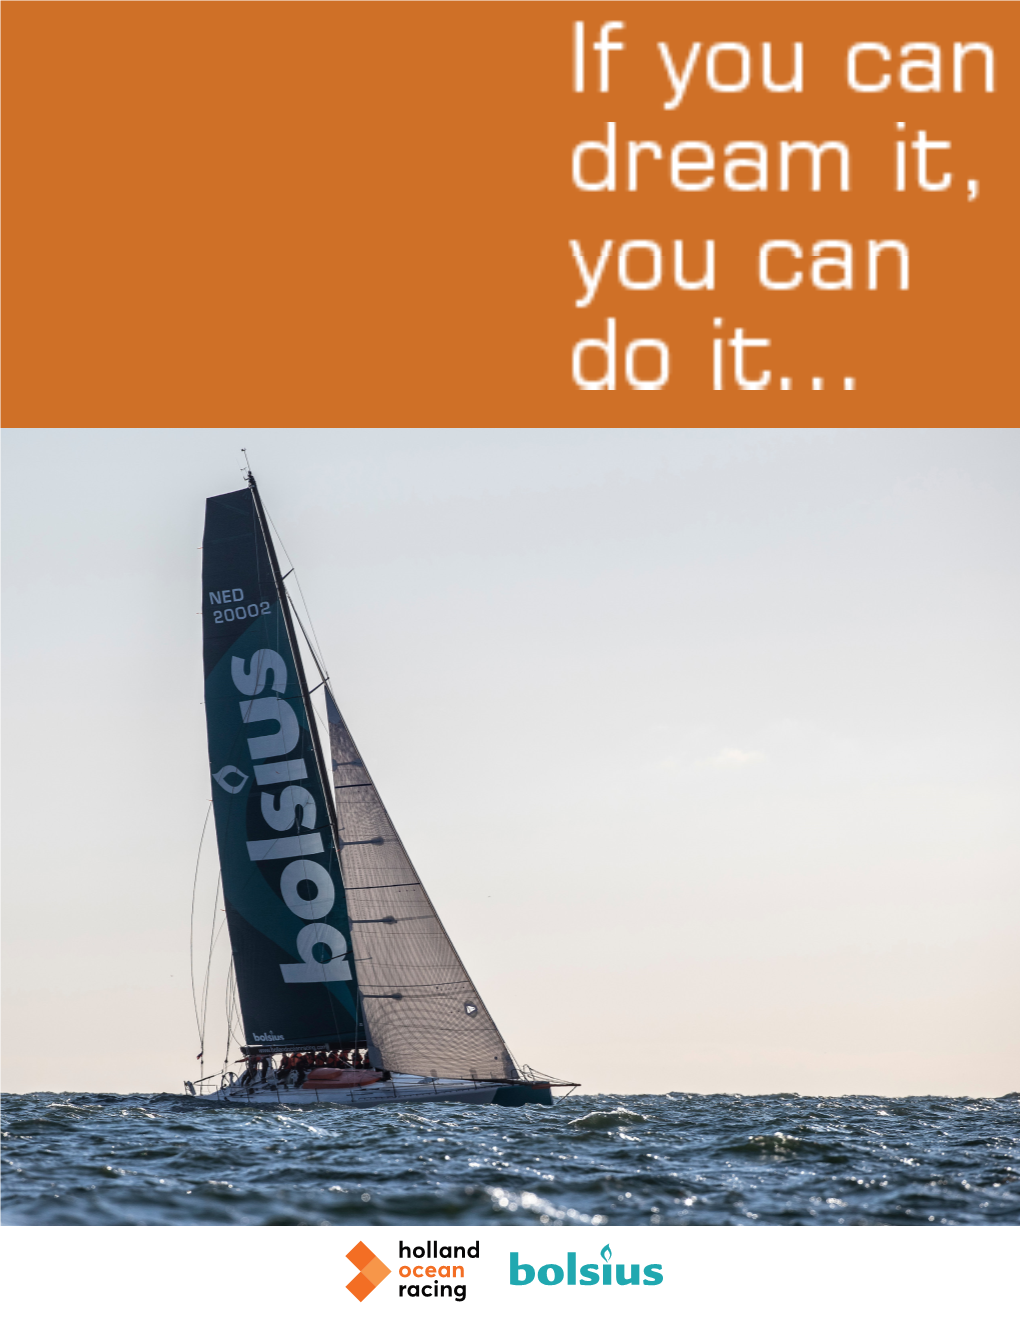 Ocean Races Academy in a Foundation and to Profile Ocean Sailing Through a Bigger Platform